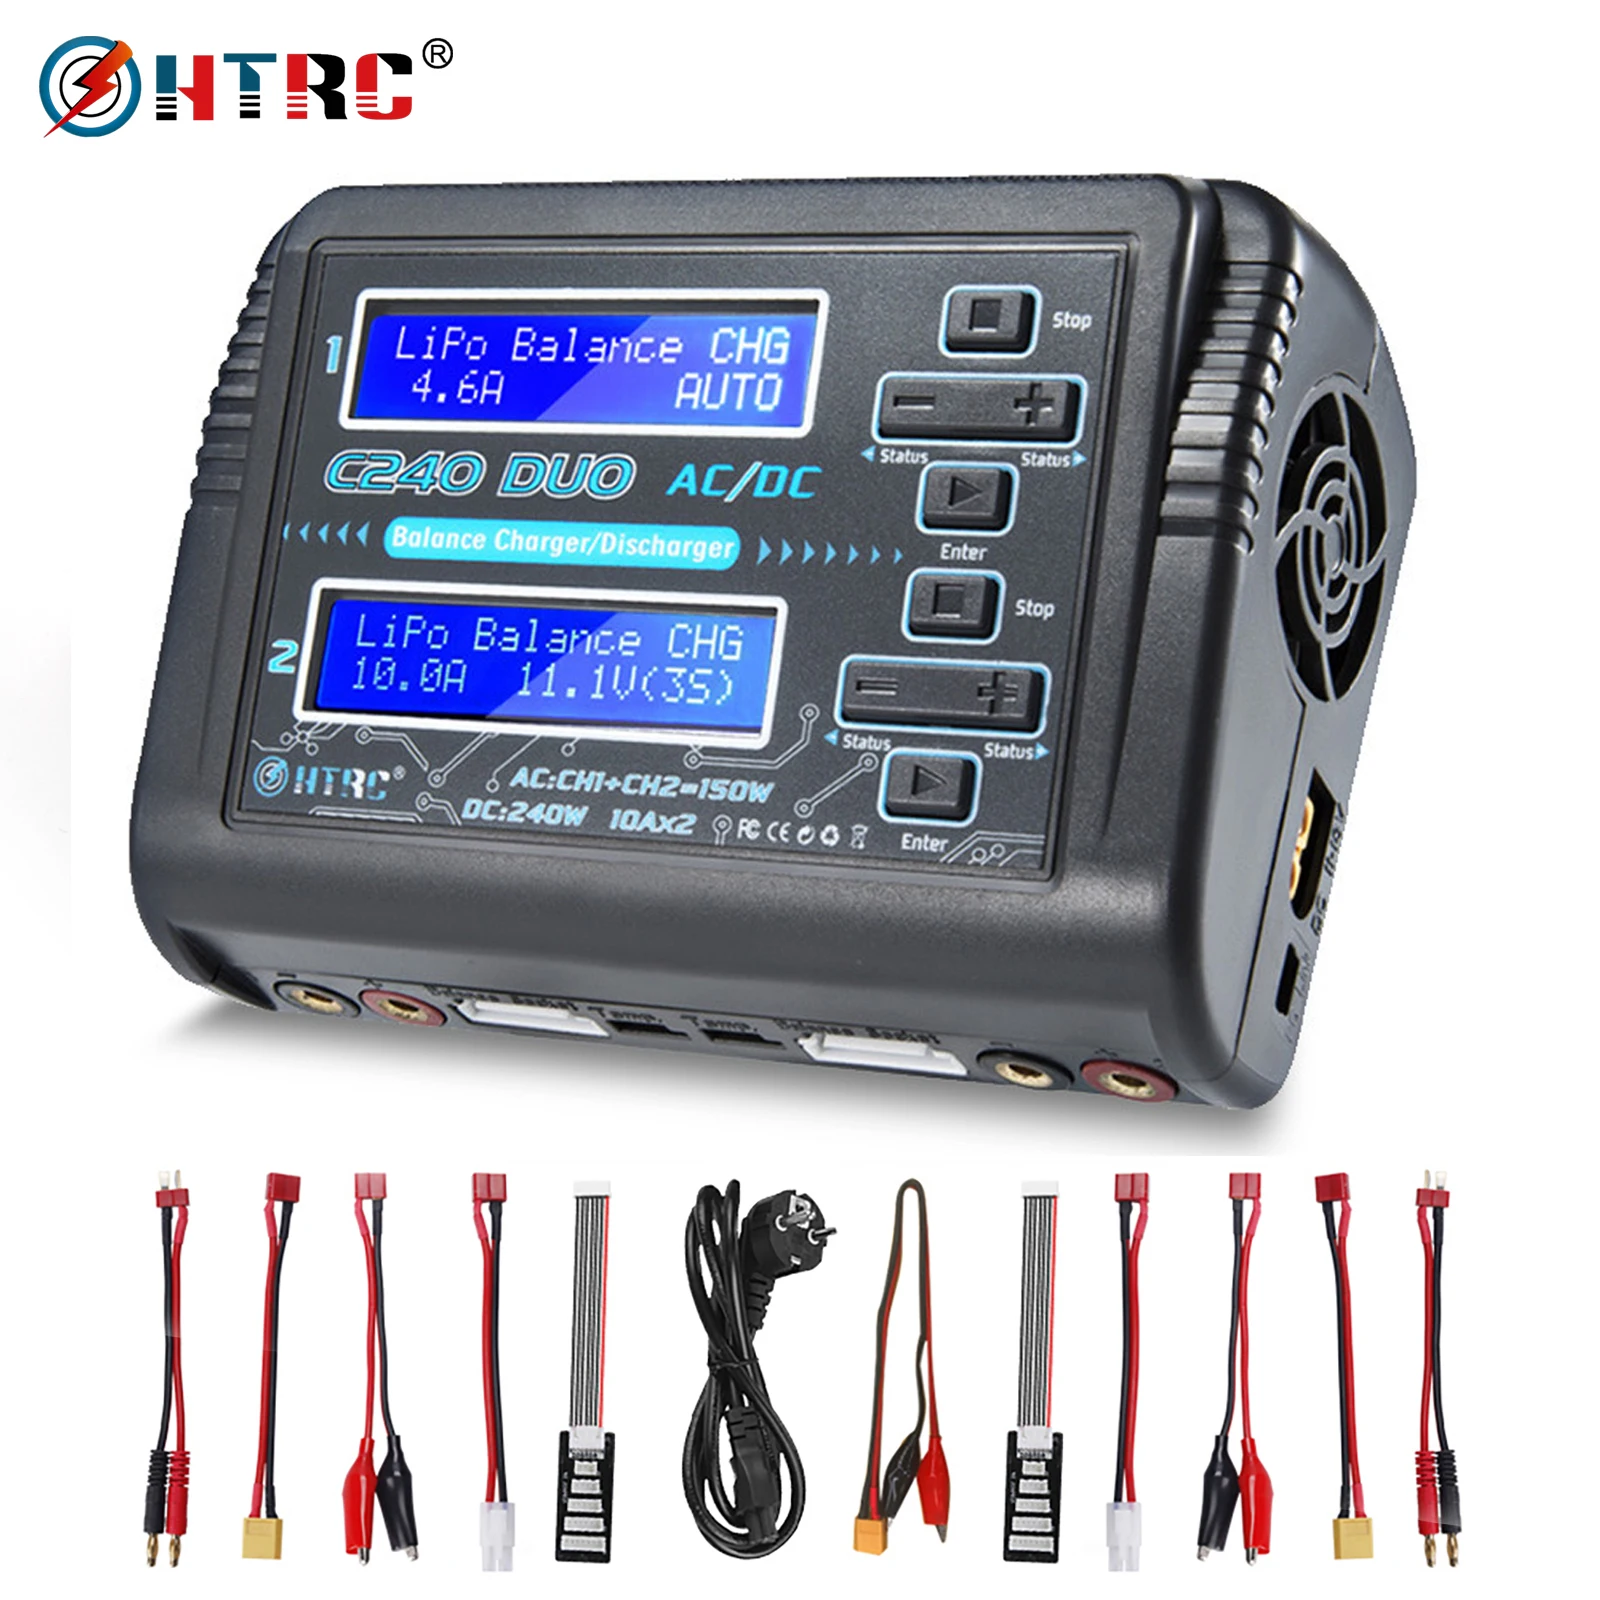 

HTRC LiPo Battery Charger T240/C240 Dual Channel 10A AC 150W DC 240W for 1-6S Li-ion LiFe NiCd NiMH LiHV PB Battery Discharger